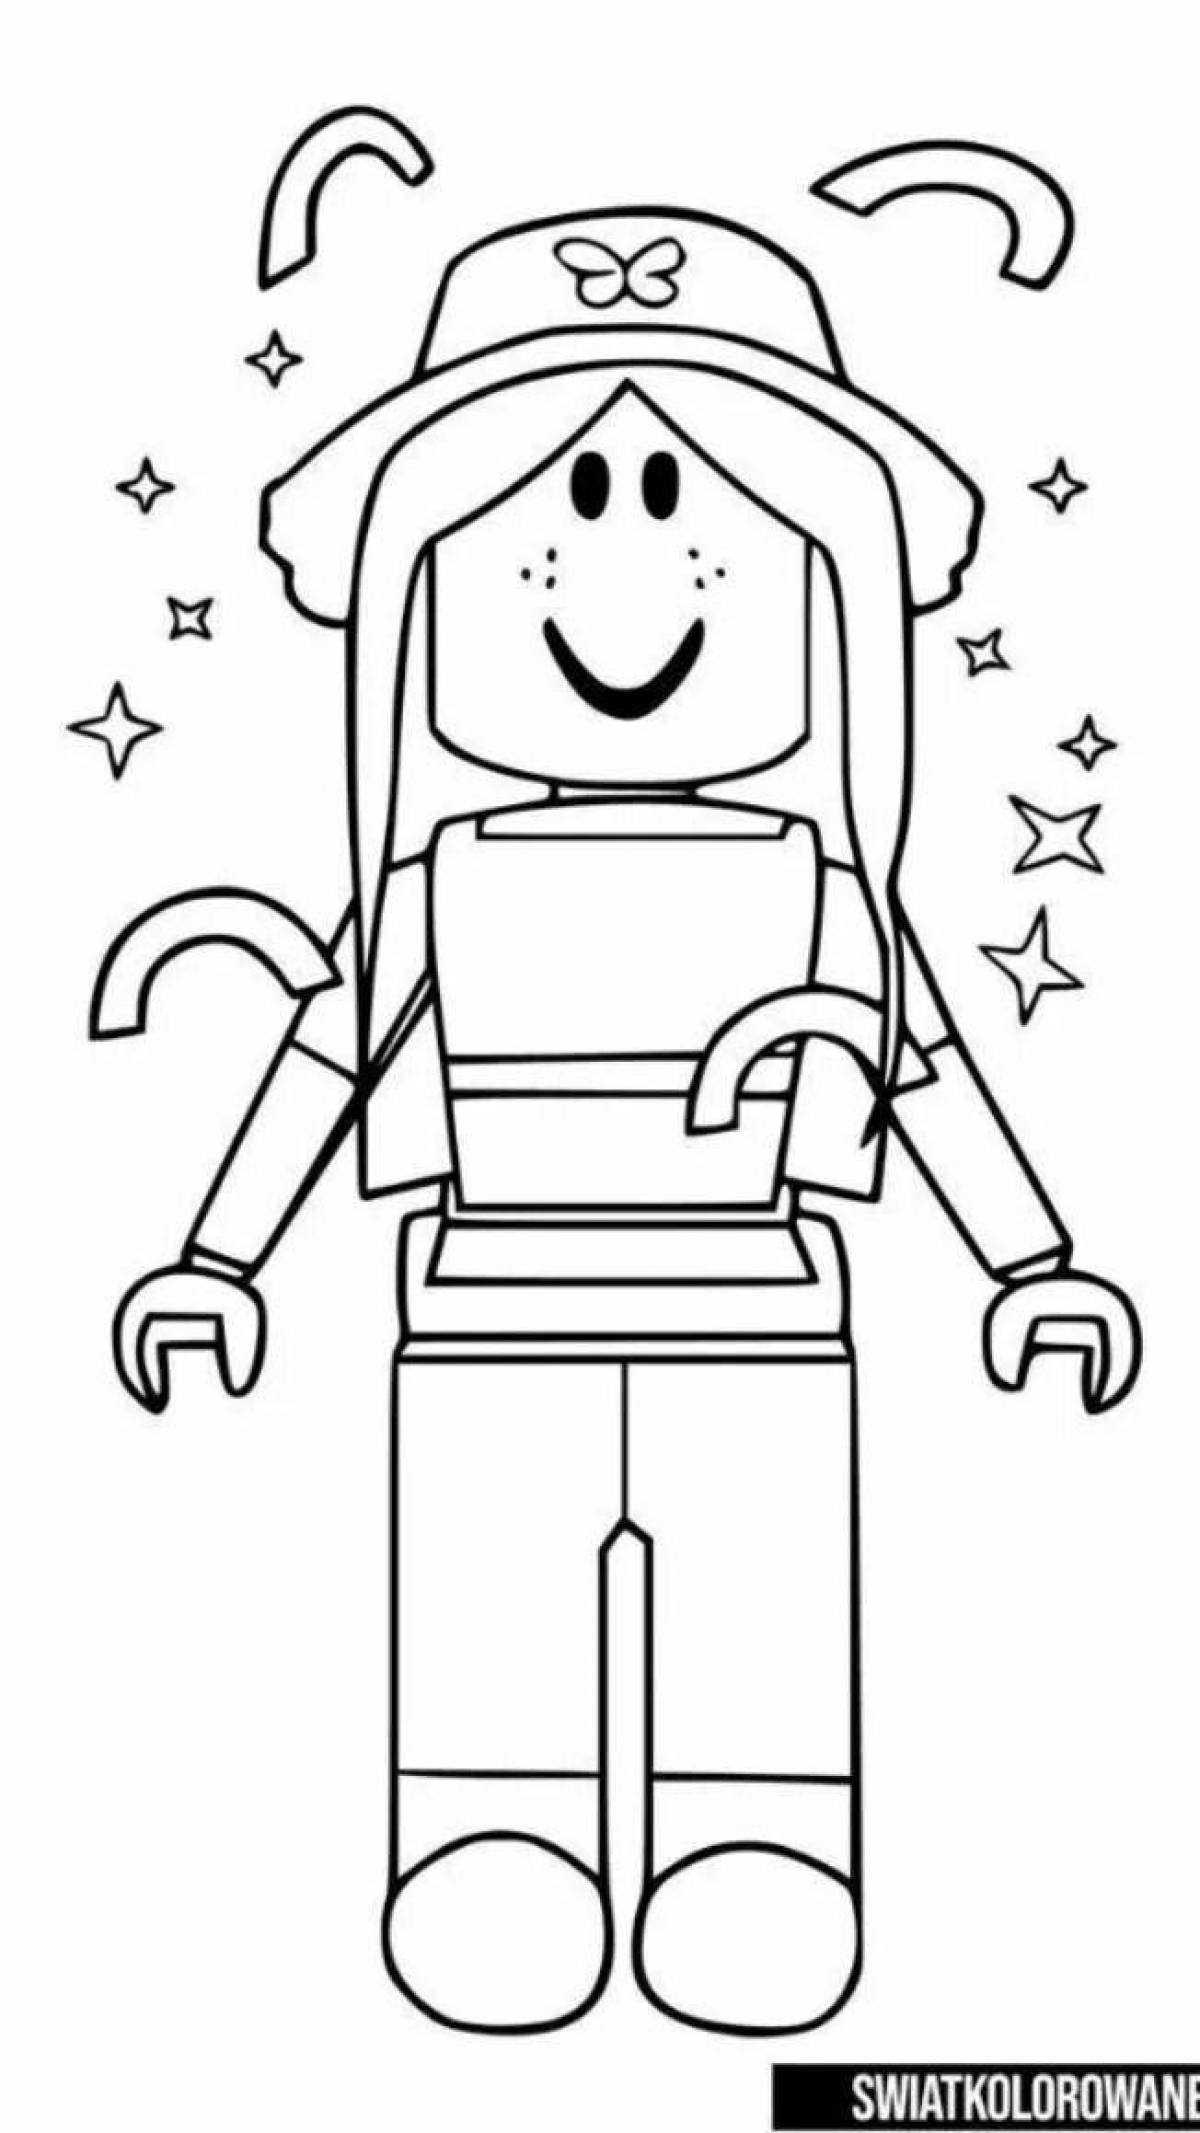 Roblox colorful characters coloring page